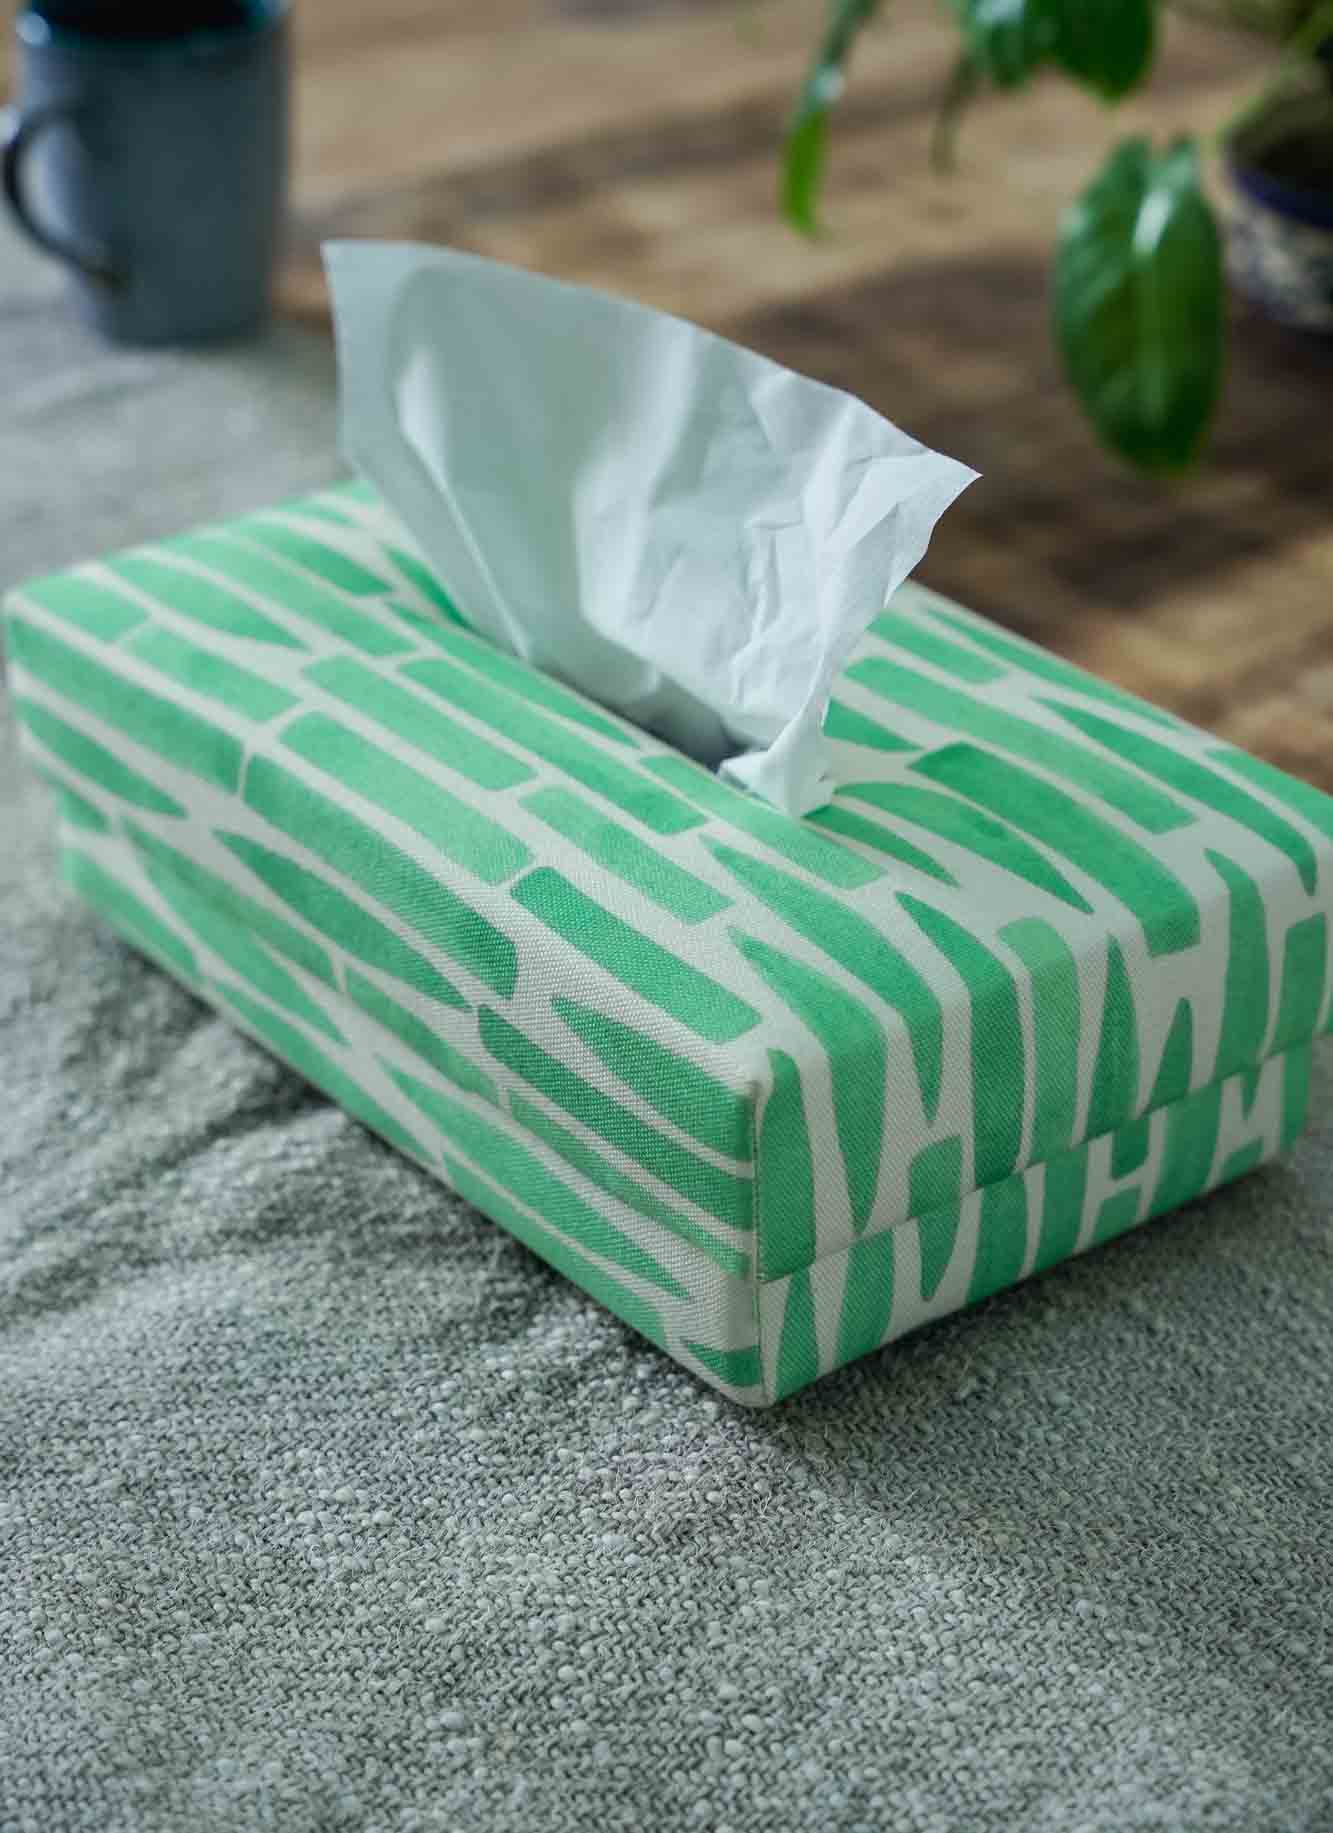 Serenity in Green: Patterned Tissue Box